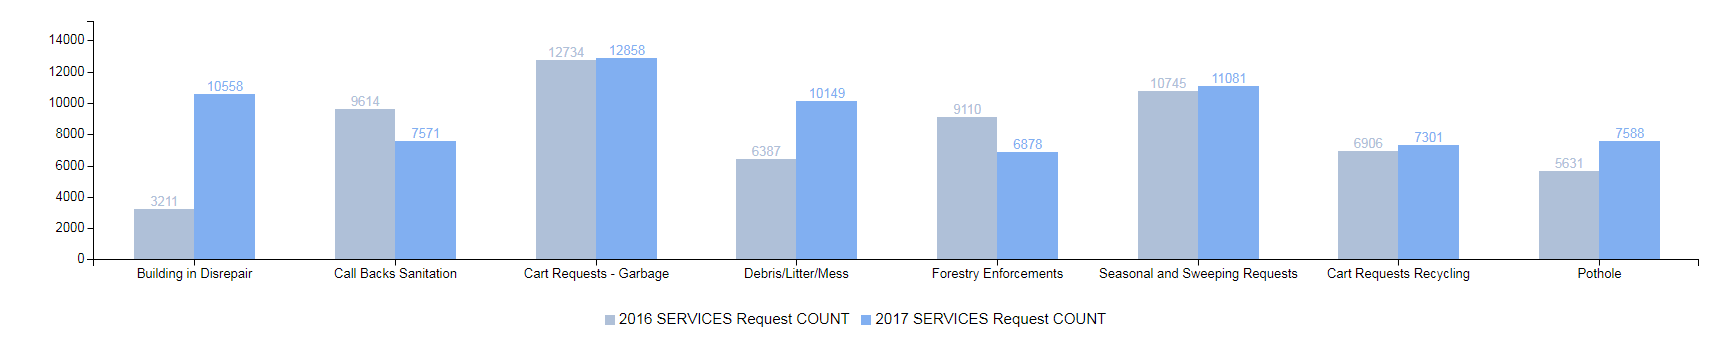 Service Request Comparisons Between 2016 and 2017